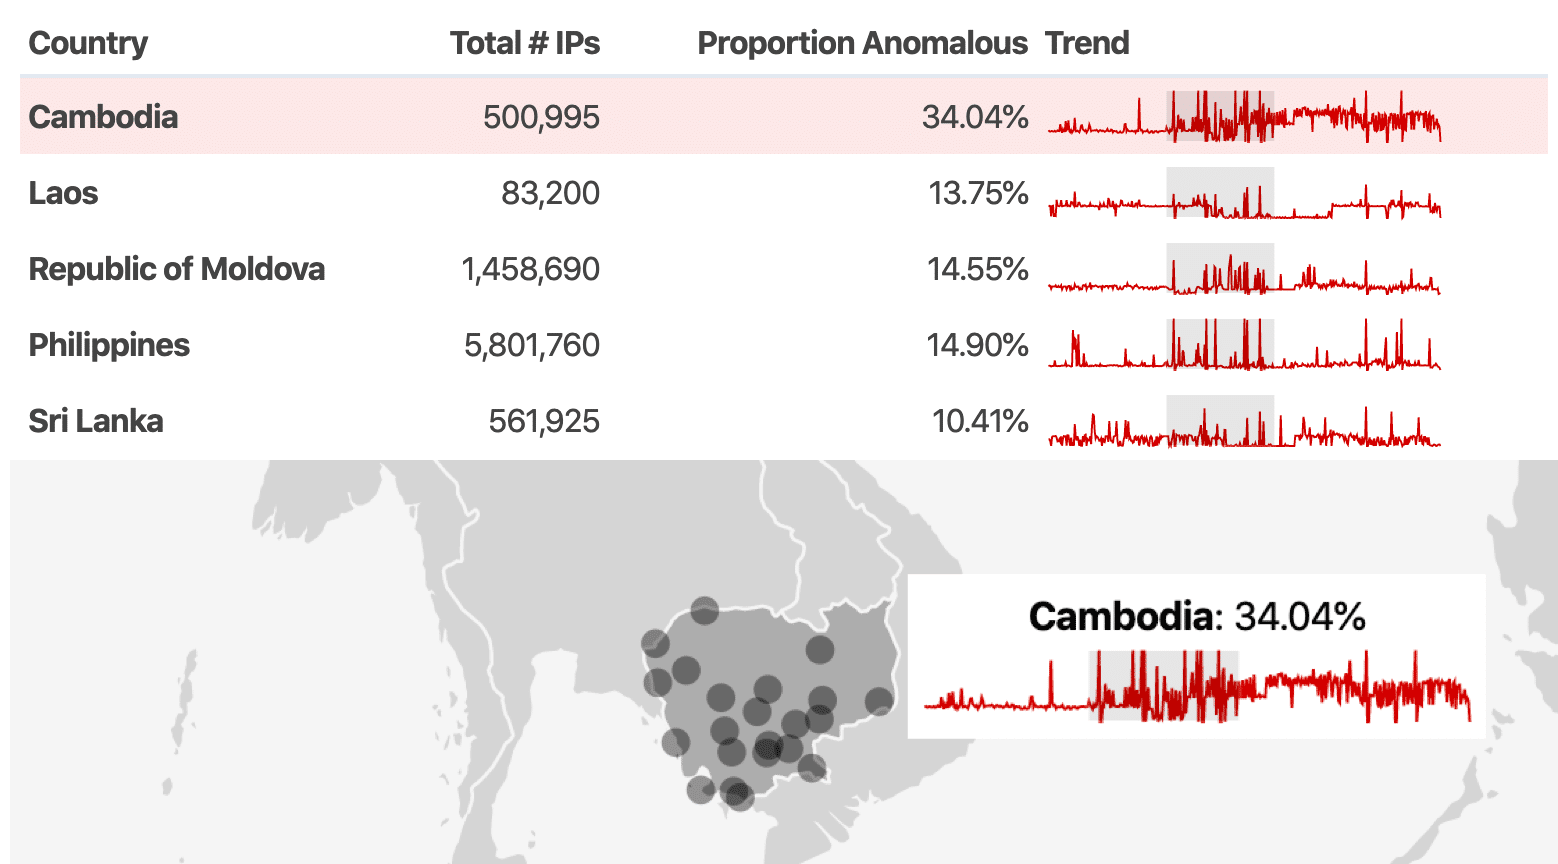 The dashboard components focused on Cambodia